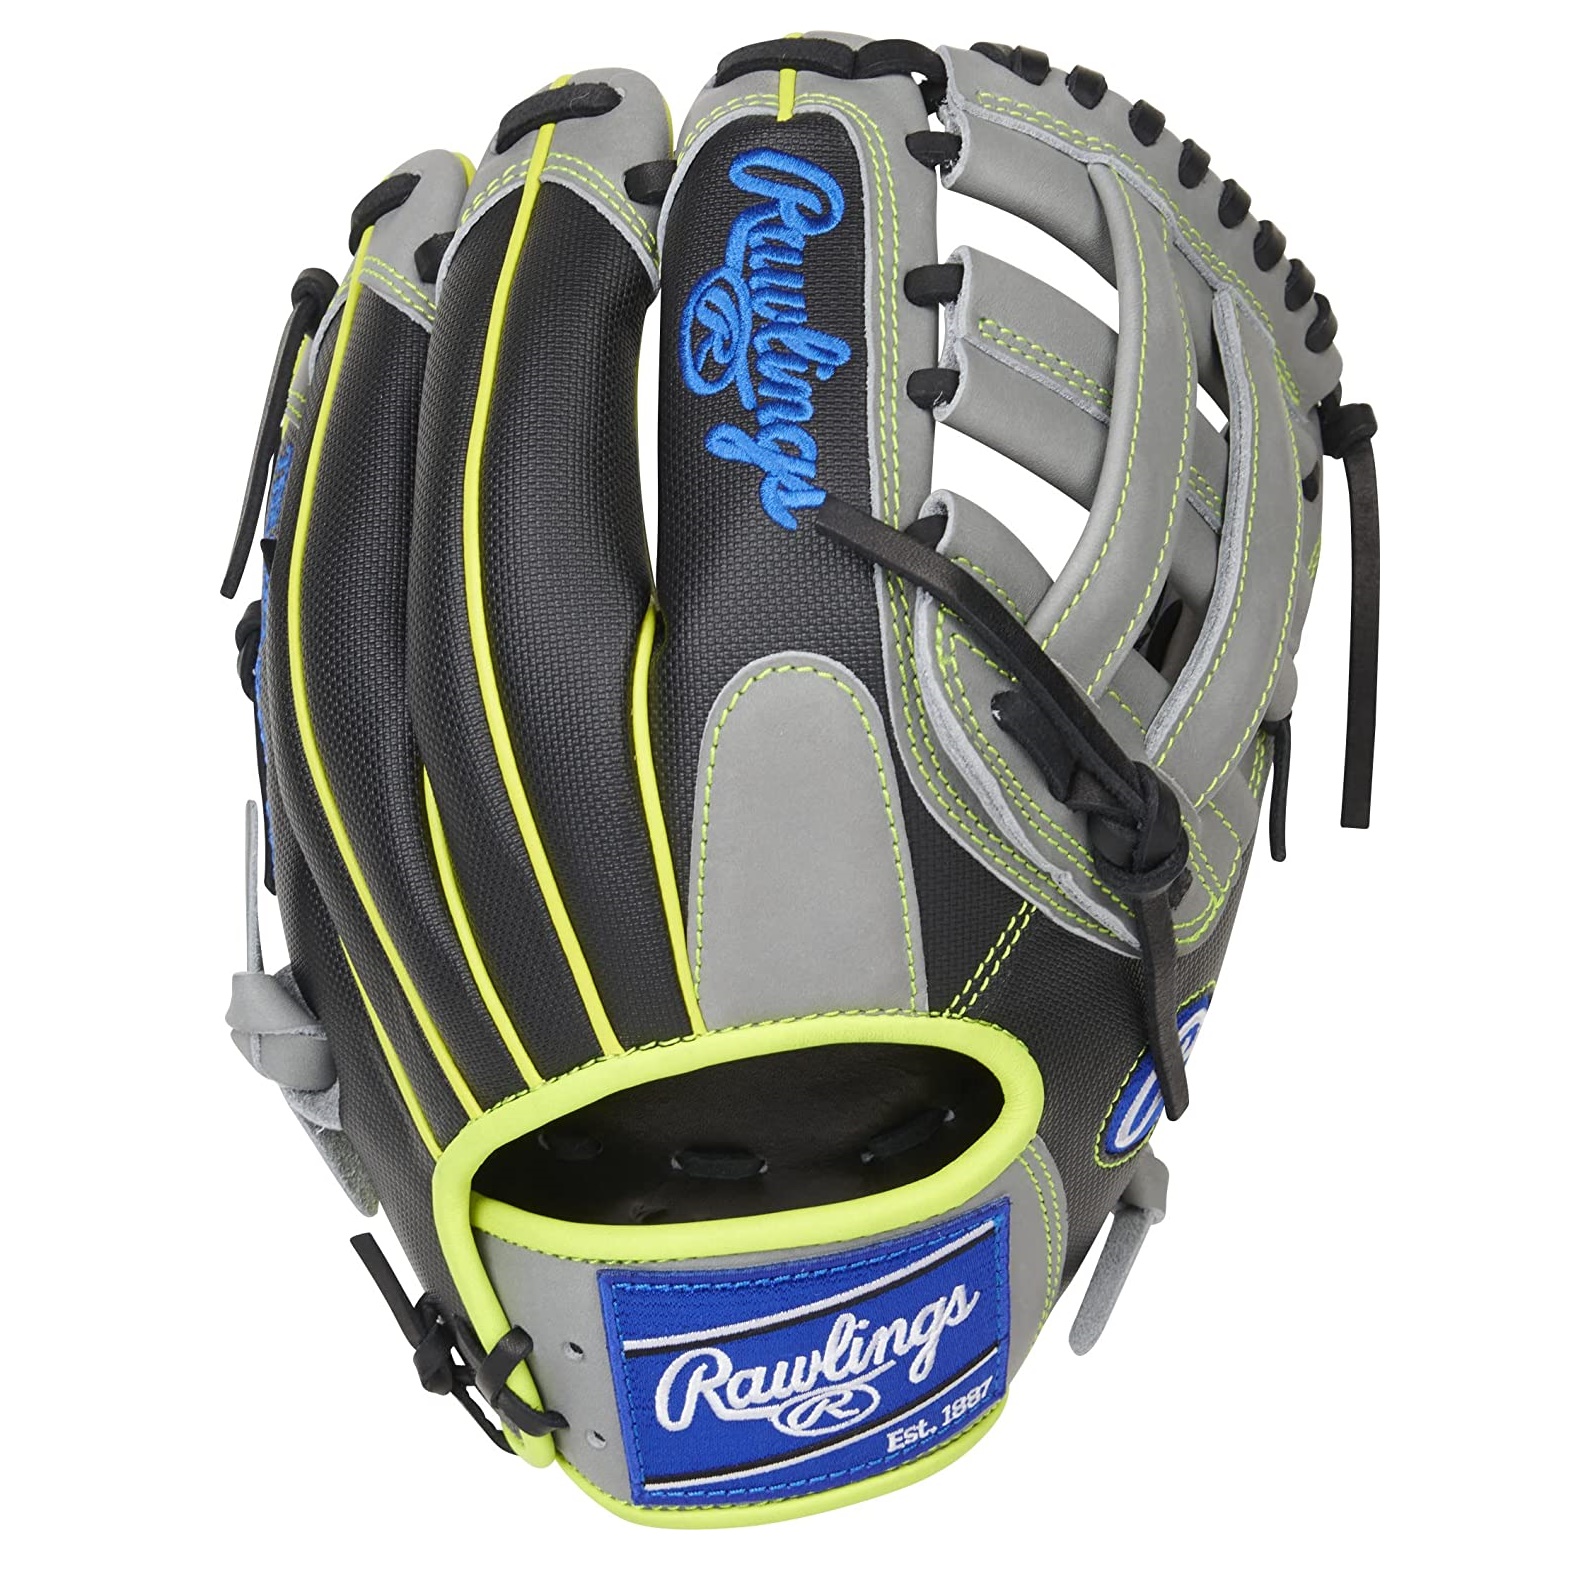 rawlings-heart-of-the-hide-baseball-glove-11-75-inch-pro-h-web-right-hand-throw PRO205-6GRSS-RightHandThrow Rawlings  <p>Constructed from Rawlings world-renowned Heart of the Hide steer leather.</p> <p>Taken